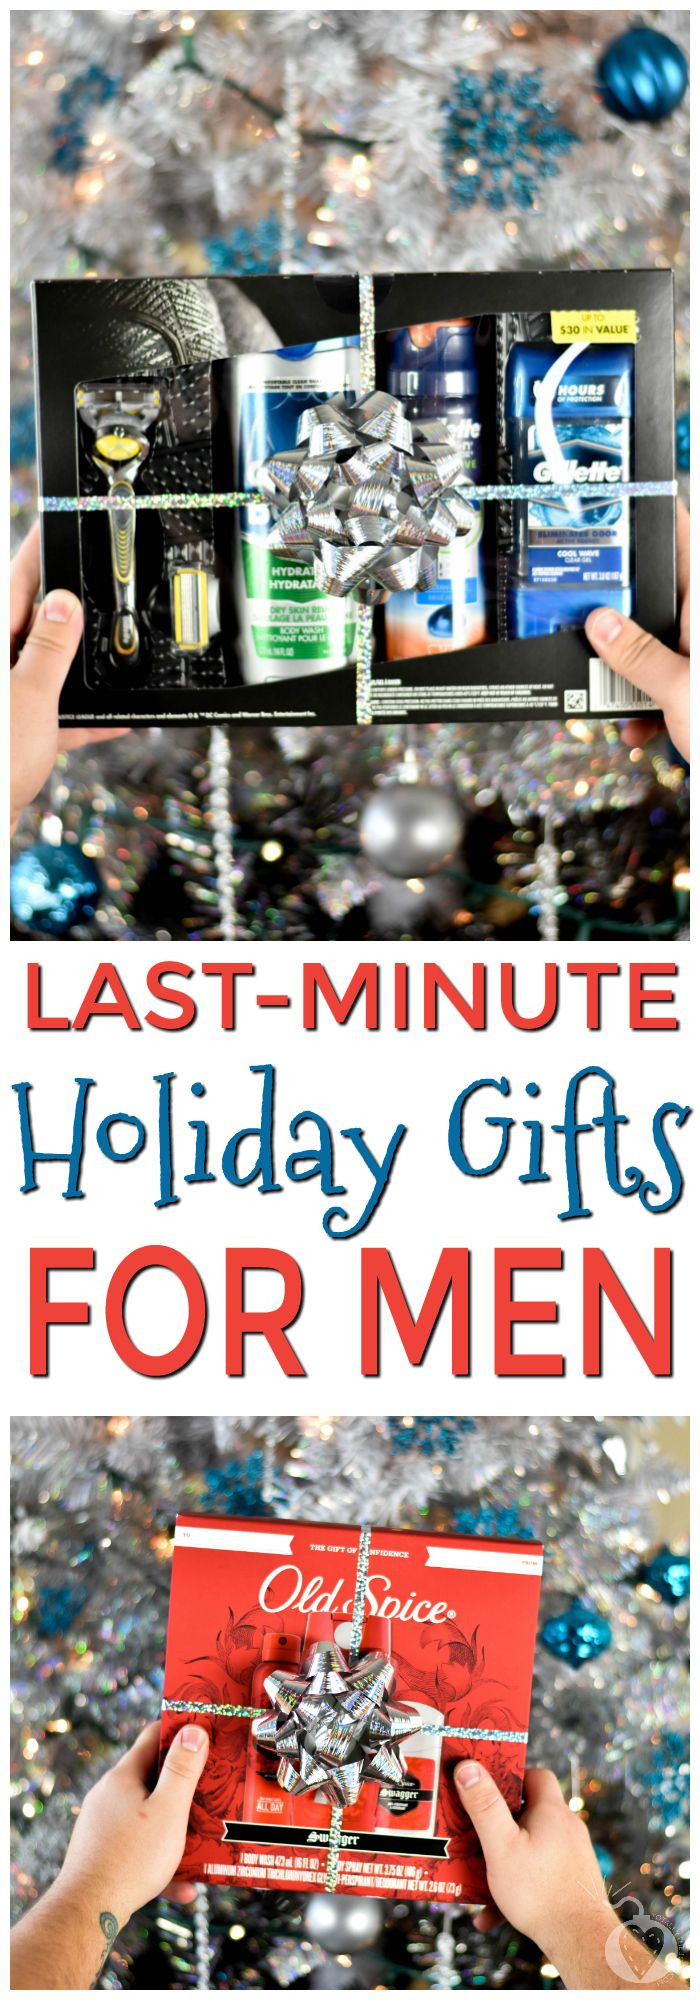 Last Minute Birthday Gift Ideas For Him
 Last Minute Gift Ideas for Men